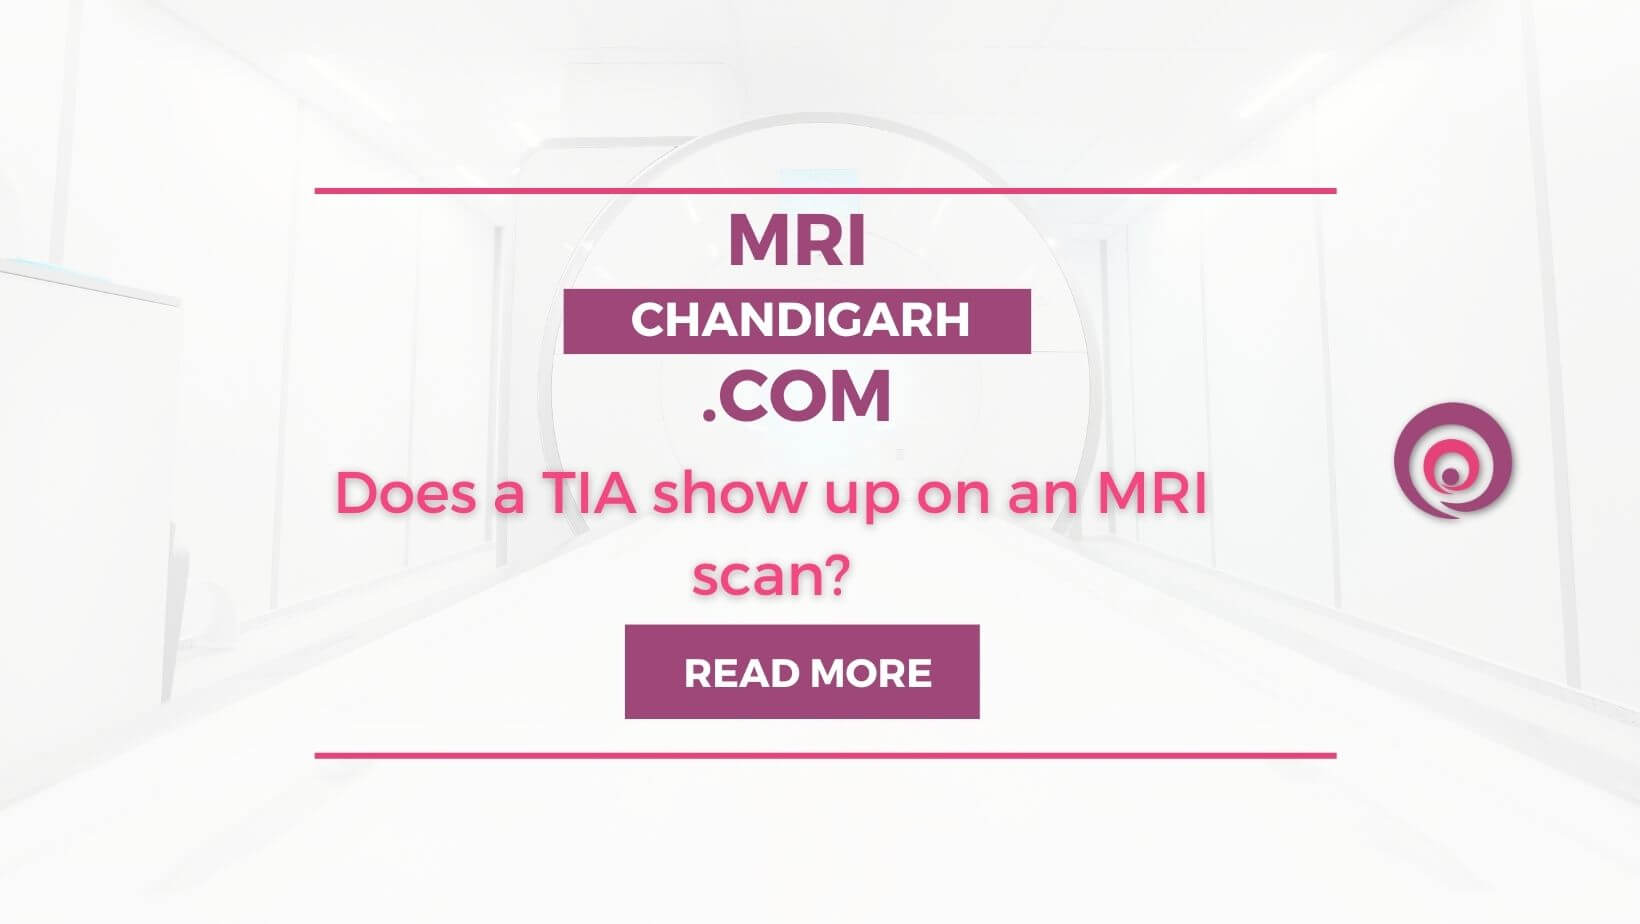 Does a TIA show up on a MRI scan?